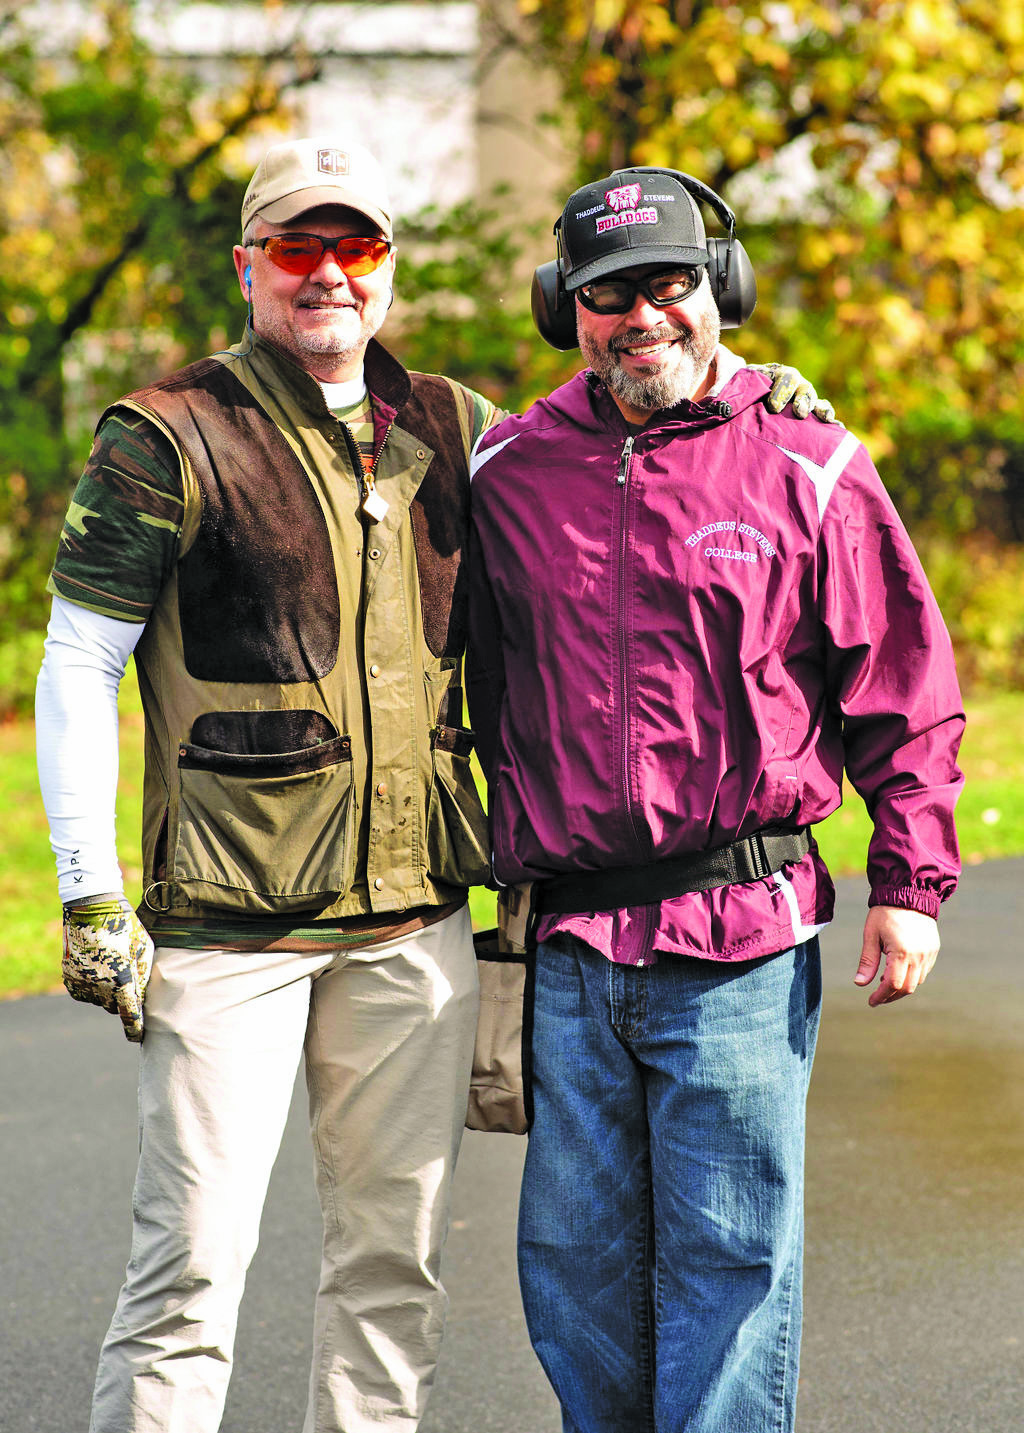 Pedro Rivera, president of Thaddeus Stevens College of Technology, and Ron Bracalente, CEO/president of Bracalente Manufacturing, at the Silvene Bracalente Memorial Foundation (SBMF), which held its seventh annual Sporting Clay Shoot and Fundraiser.